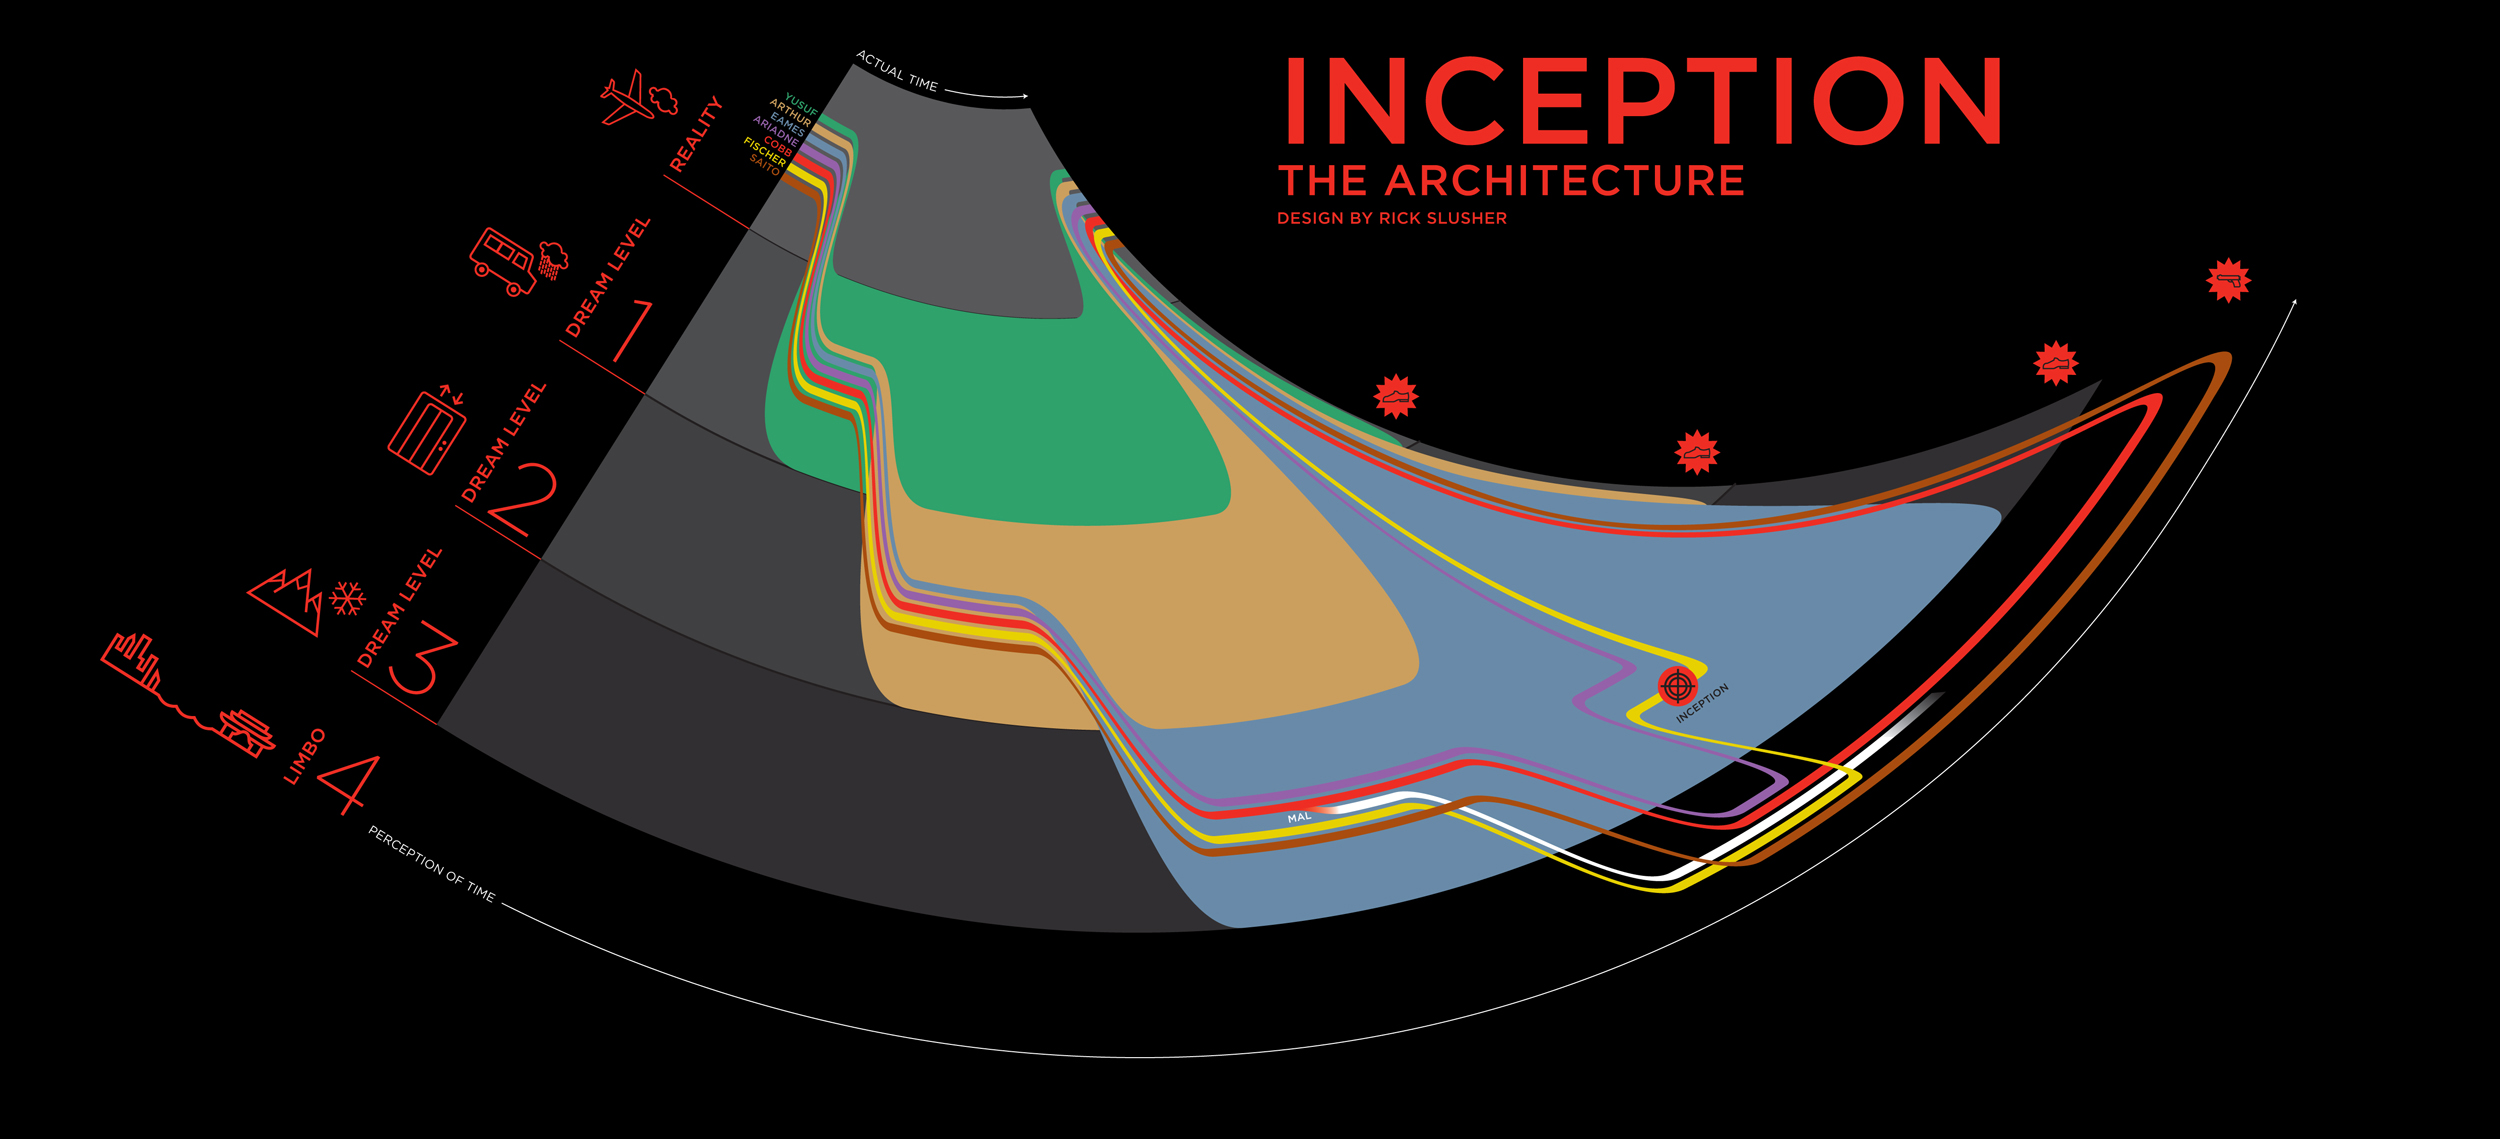 inception timeline - Inception The Architecture w n 14.